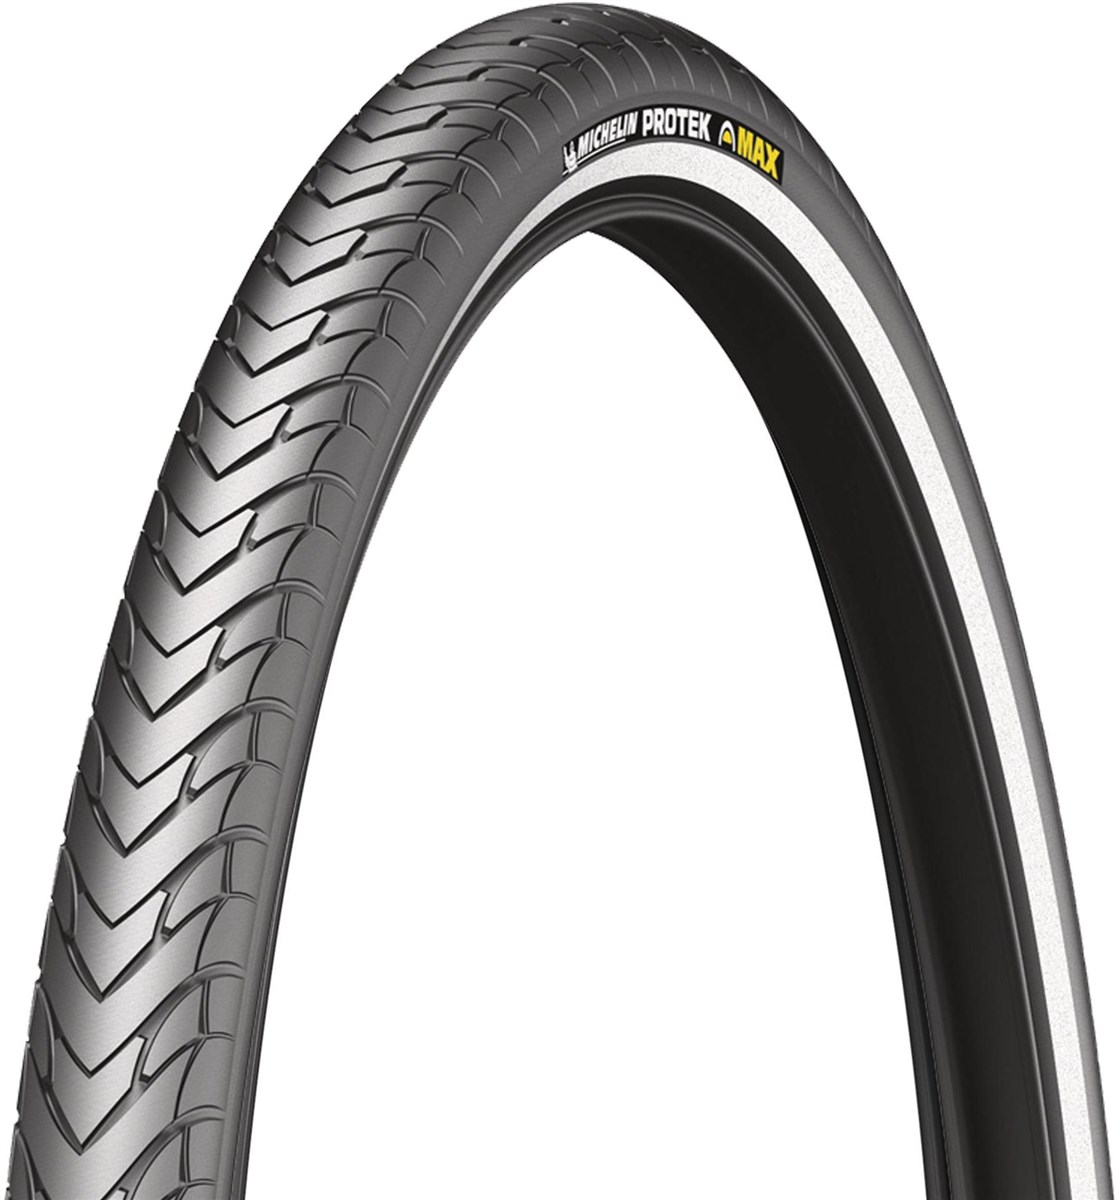 Michelin Protek Max Urban Tyre product image